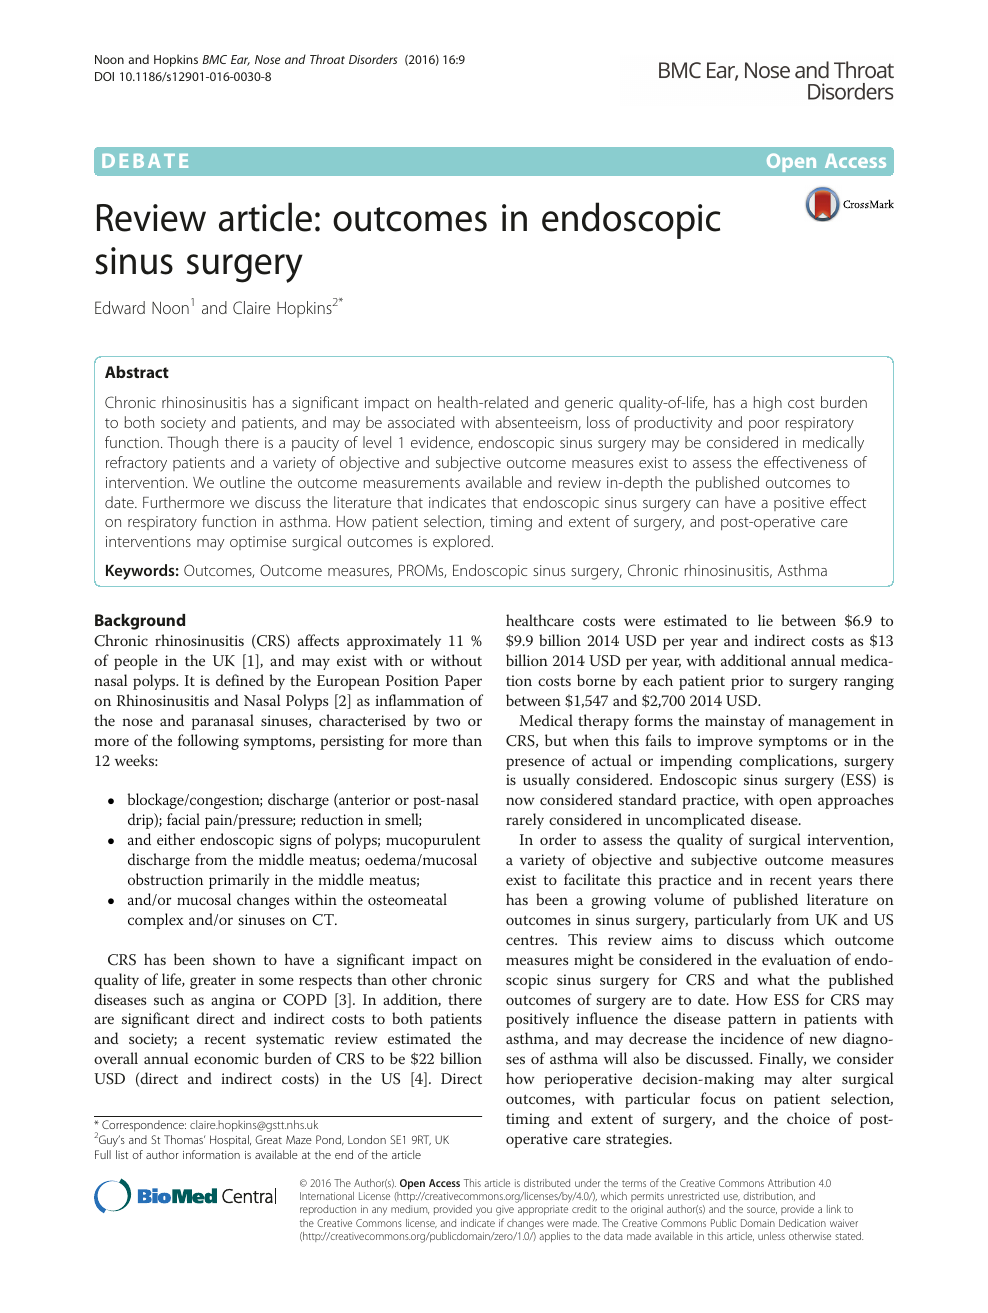 Review Article Outcomes In Endoscopic Sinus Surgery Topic Of Research Paper In Clinical Medicine Download Scholarly Article Pdf And Read For Free On Cyberleninka Open Science Hub